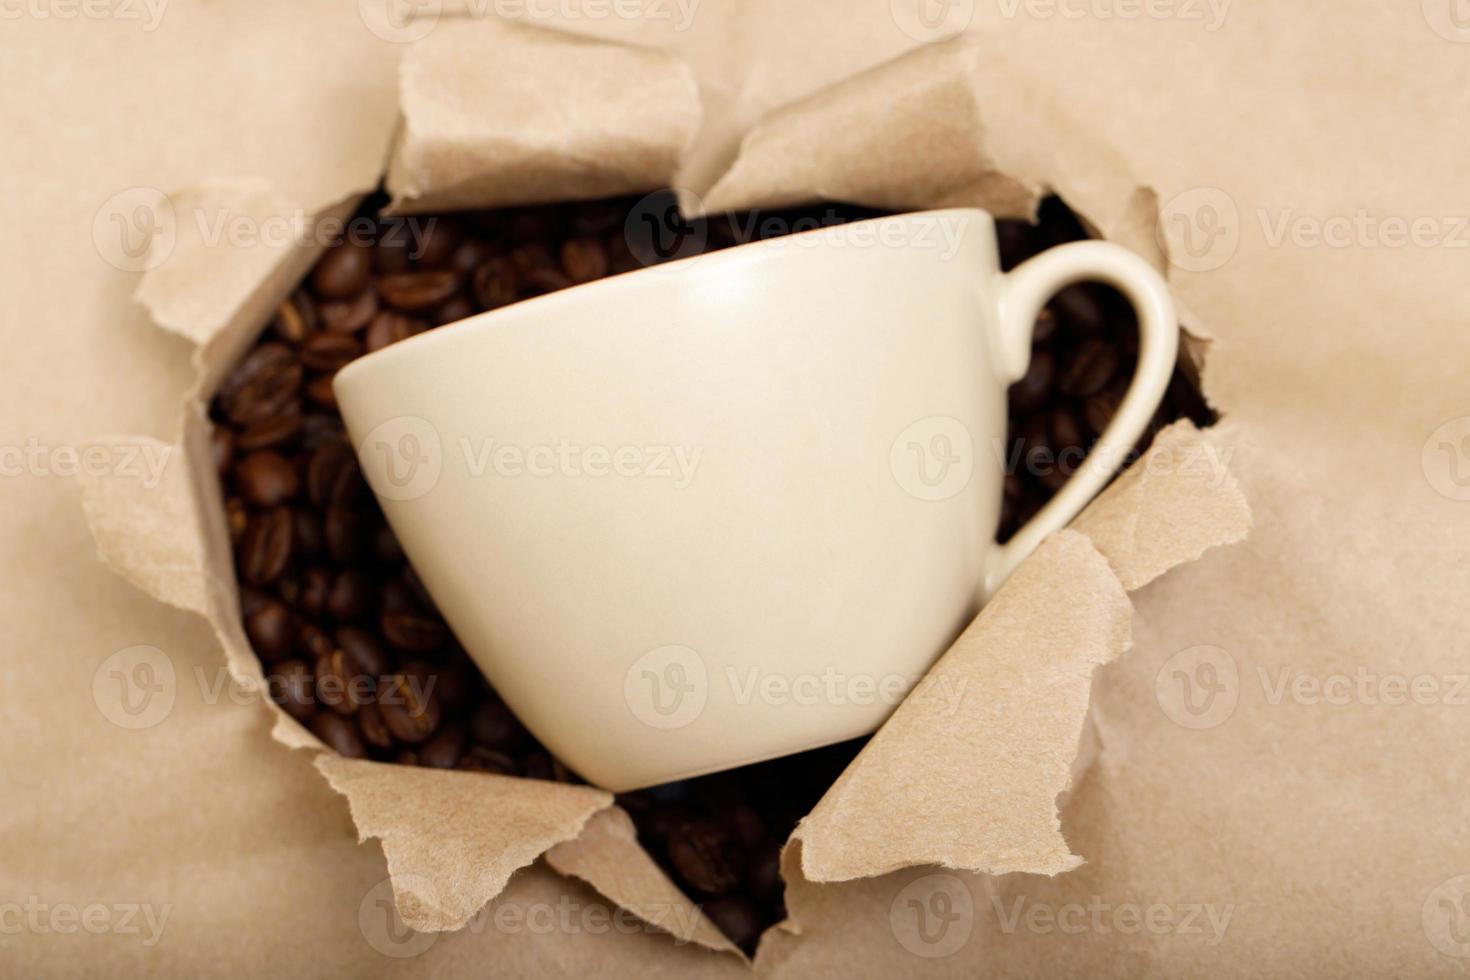 Freshly roasted coffee beans in a cup photo